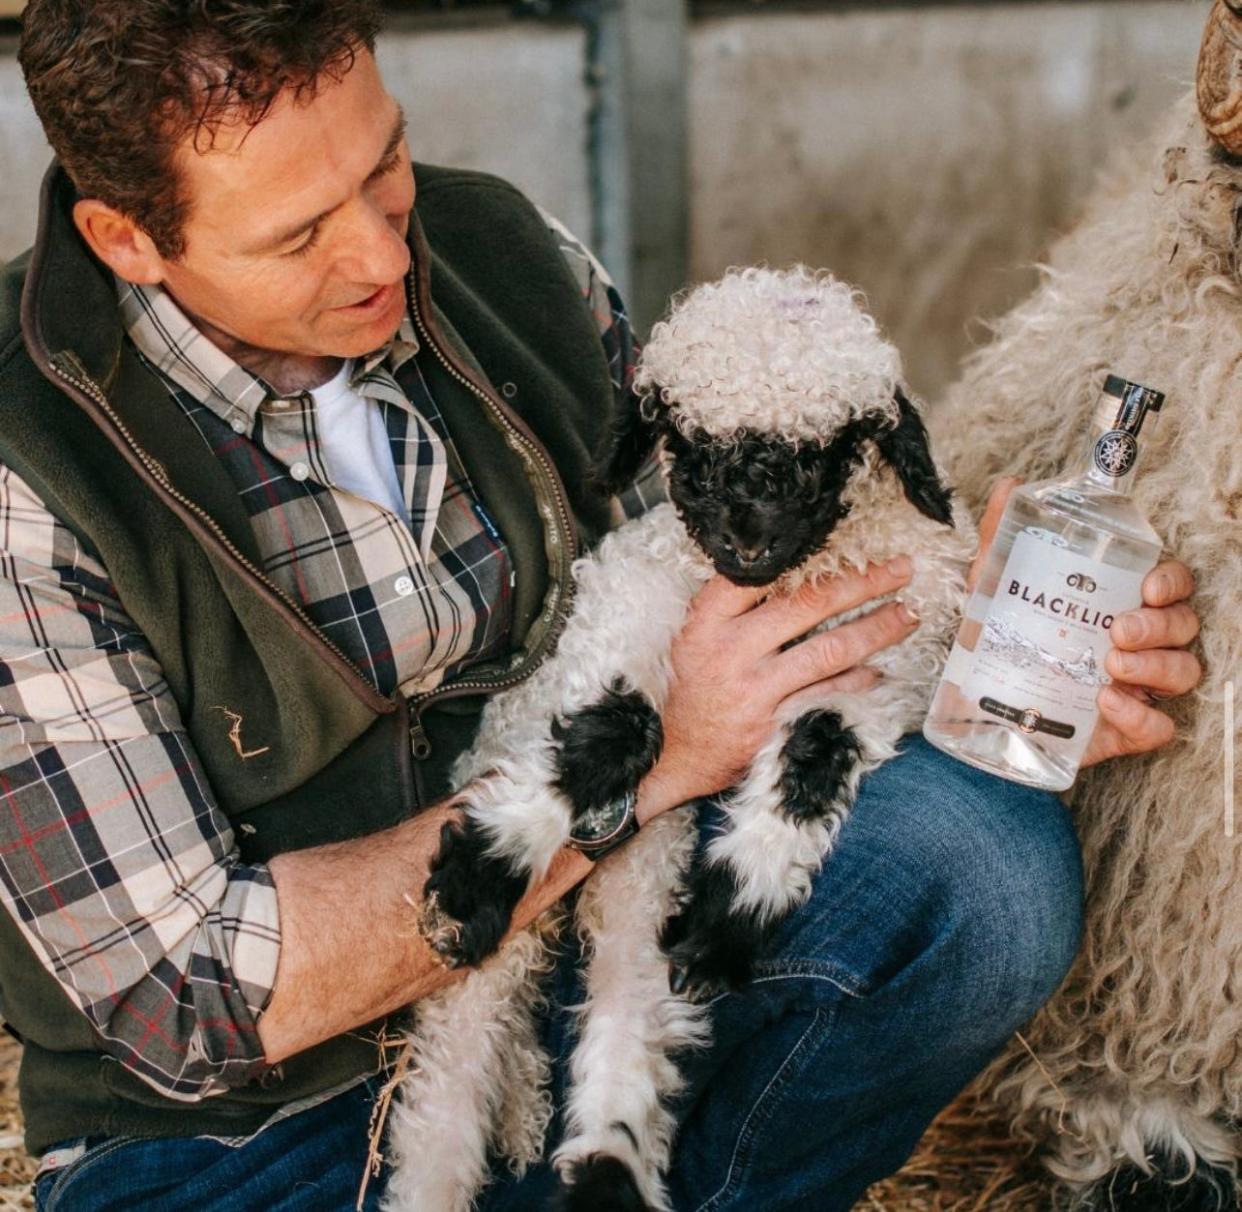 Blacklion Vodka, an award-winning British vodka made from rare sheep's milk, is finally crossing the pond to sell at American distilleries.